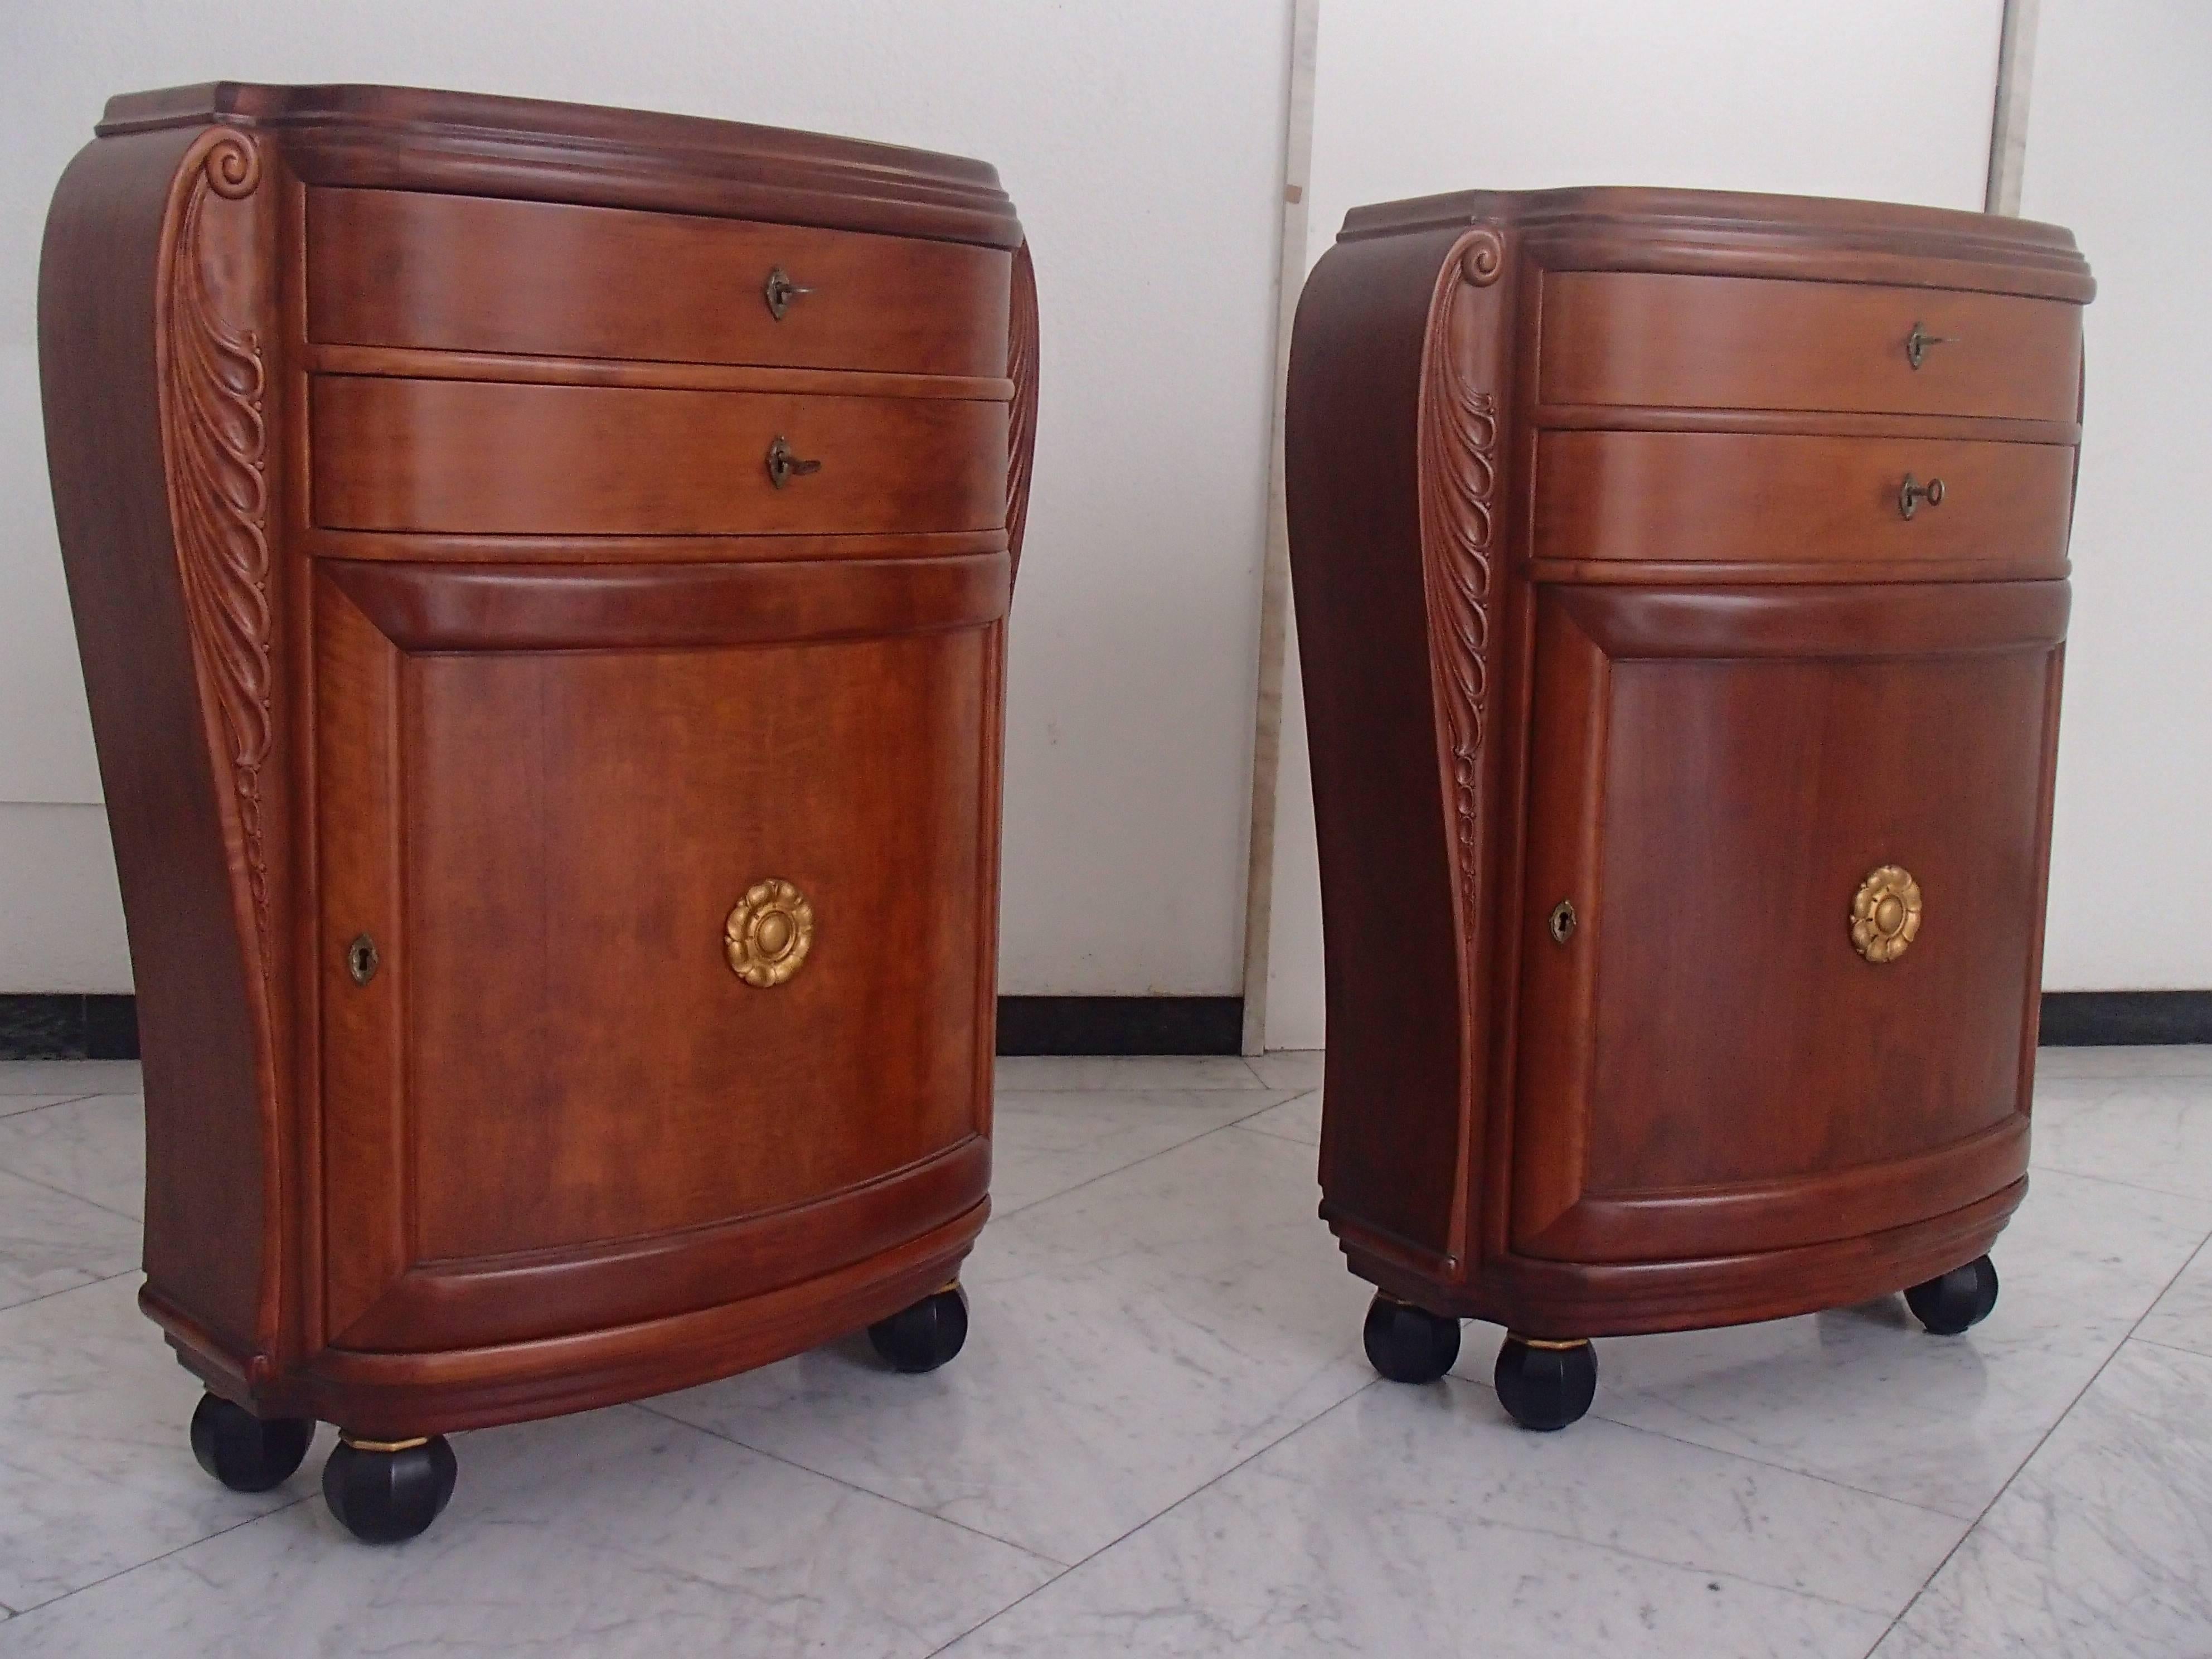 Very decorative pair of small cabinets/consoles/cupboard mahogany tinted birch.
Two drawers one door with inside one shelf beauty full carved side ornaments laying on four black and gold tinted round legs. Floral golden ornament on the door.